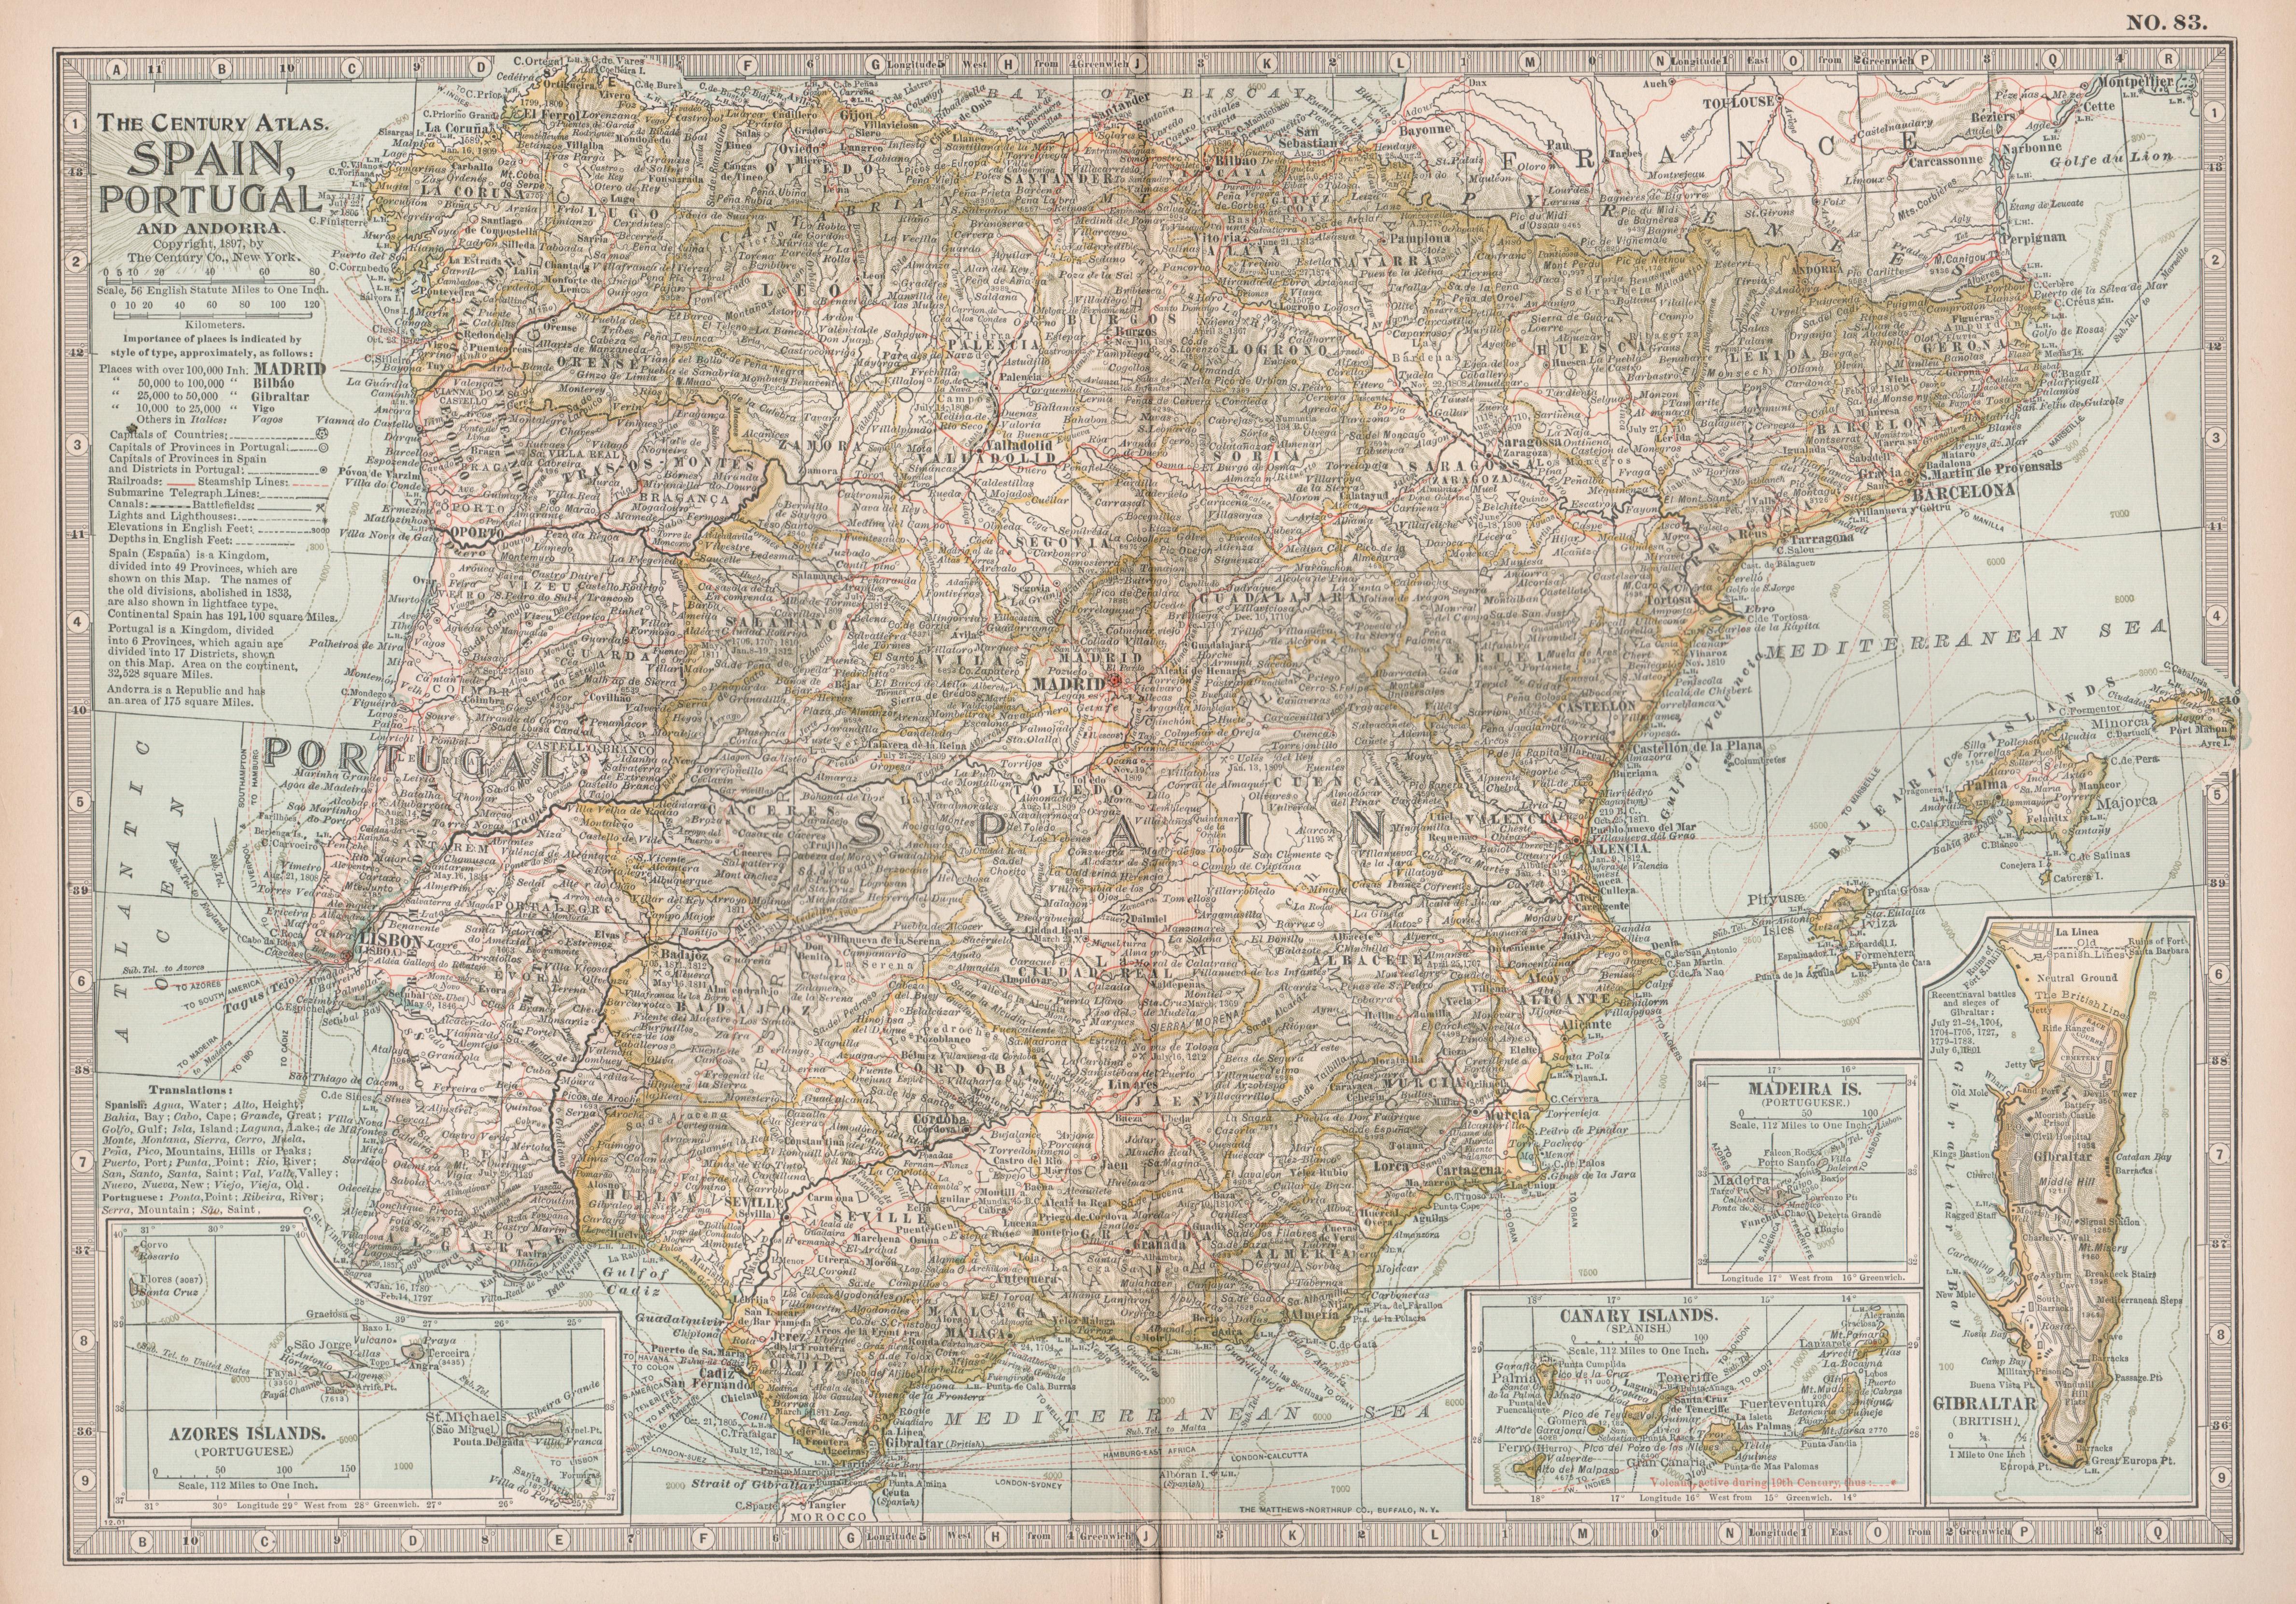 Unknown Print - Spain, Portugal and Andorra. Century Atlas antique vintage map